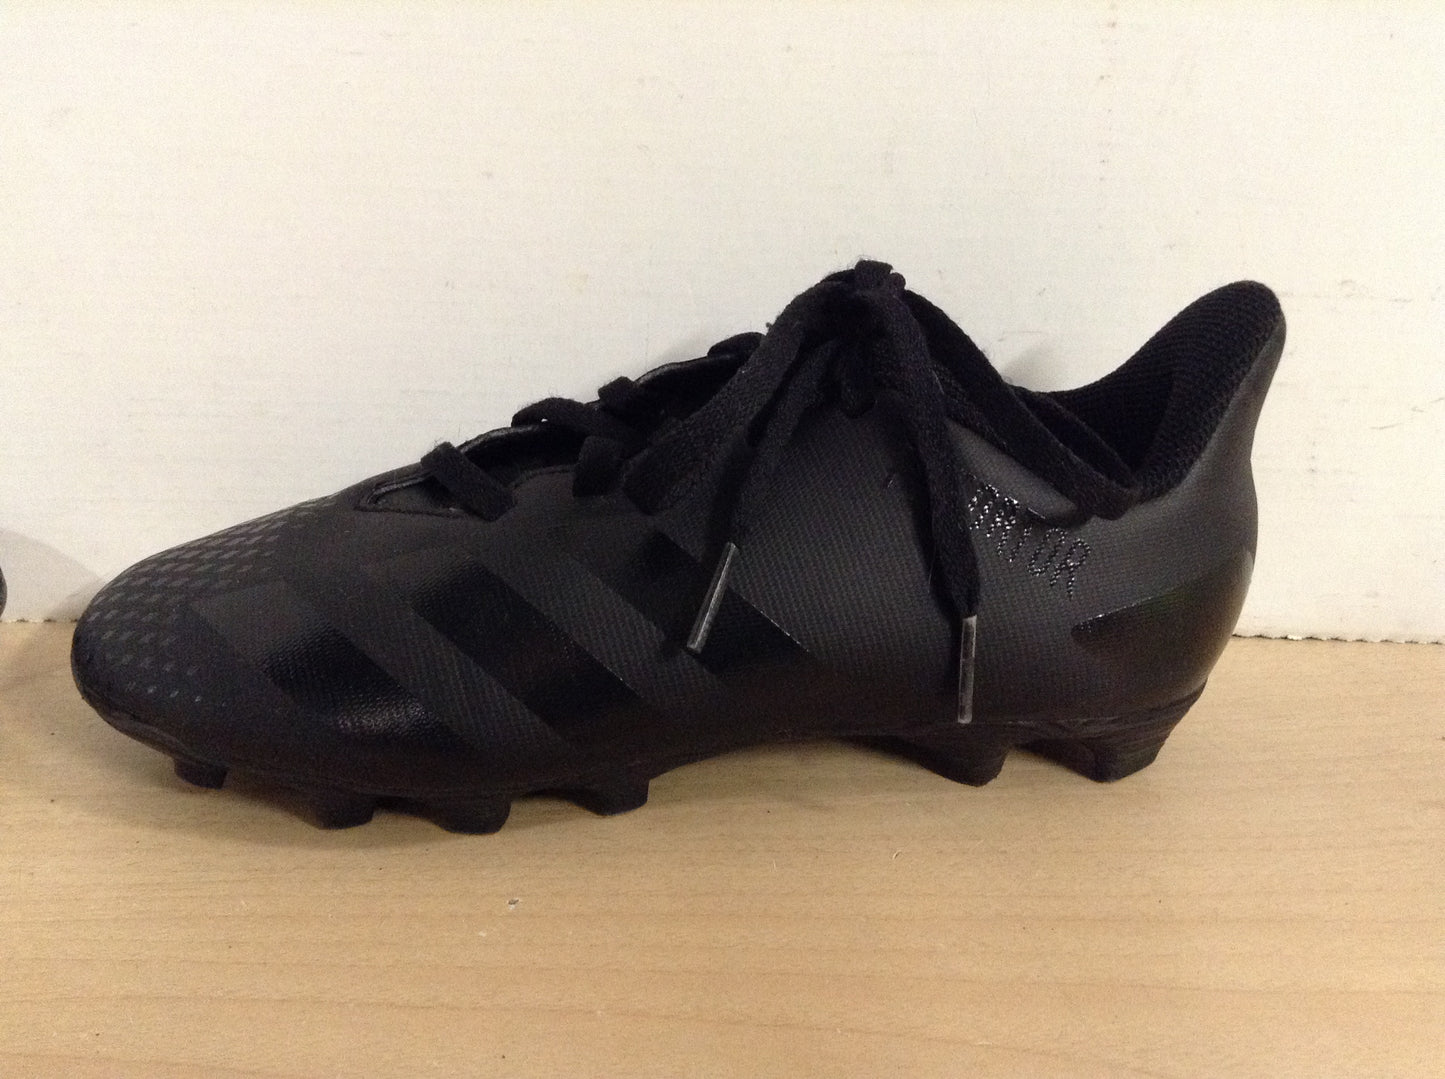 Soccer Shoes Cleats Men's Size 6.5 Adidas Preditor Demonscale Black With Slipper Foot New Demo Model